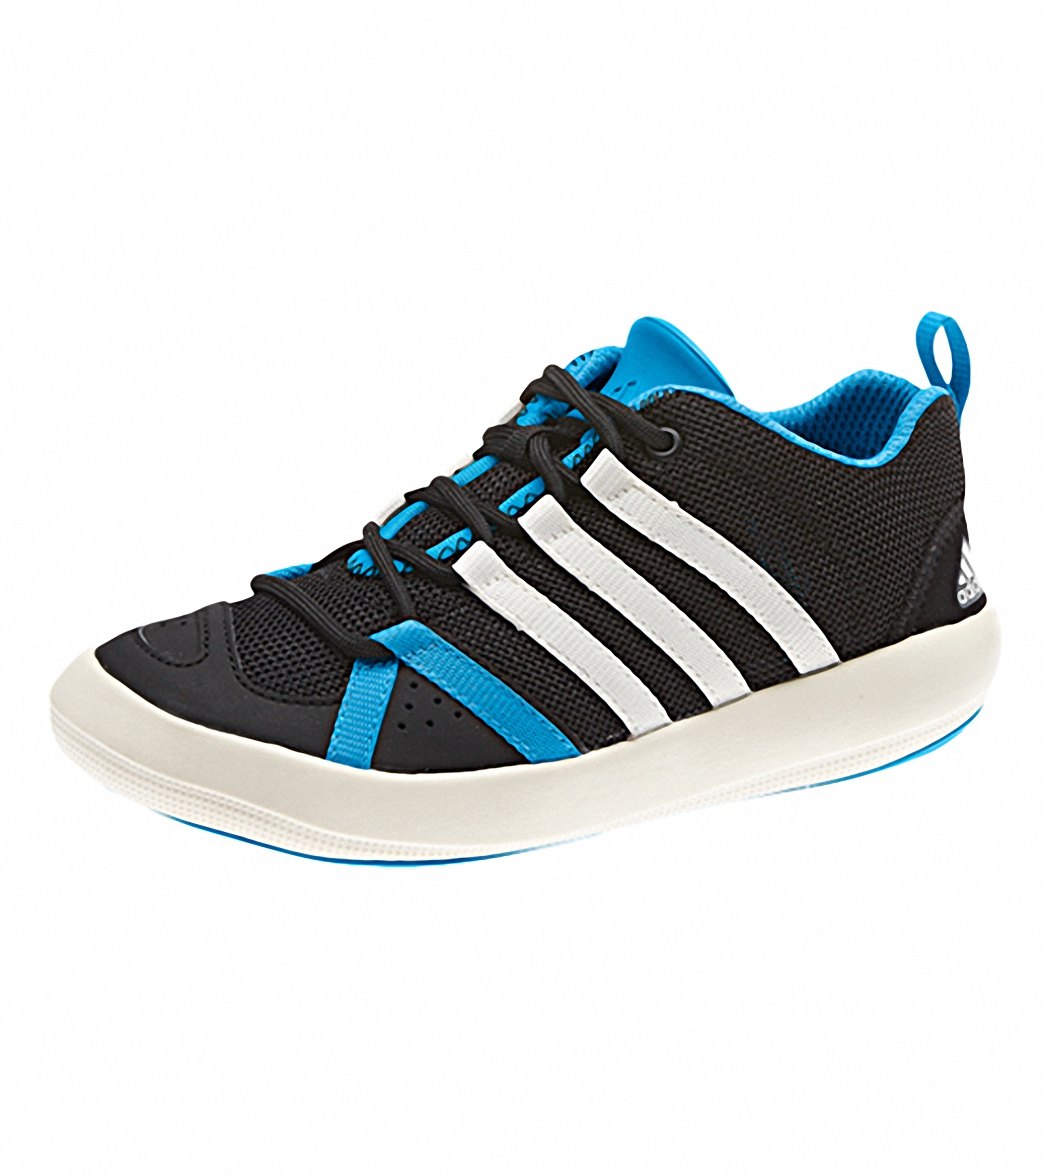 feudale opadgående dal Adidas Boys' Boat Lace Water Shoes at SwimOutlet.com